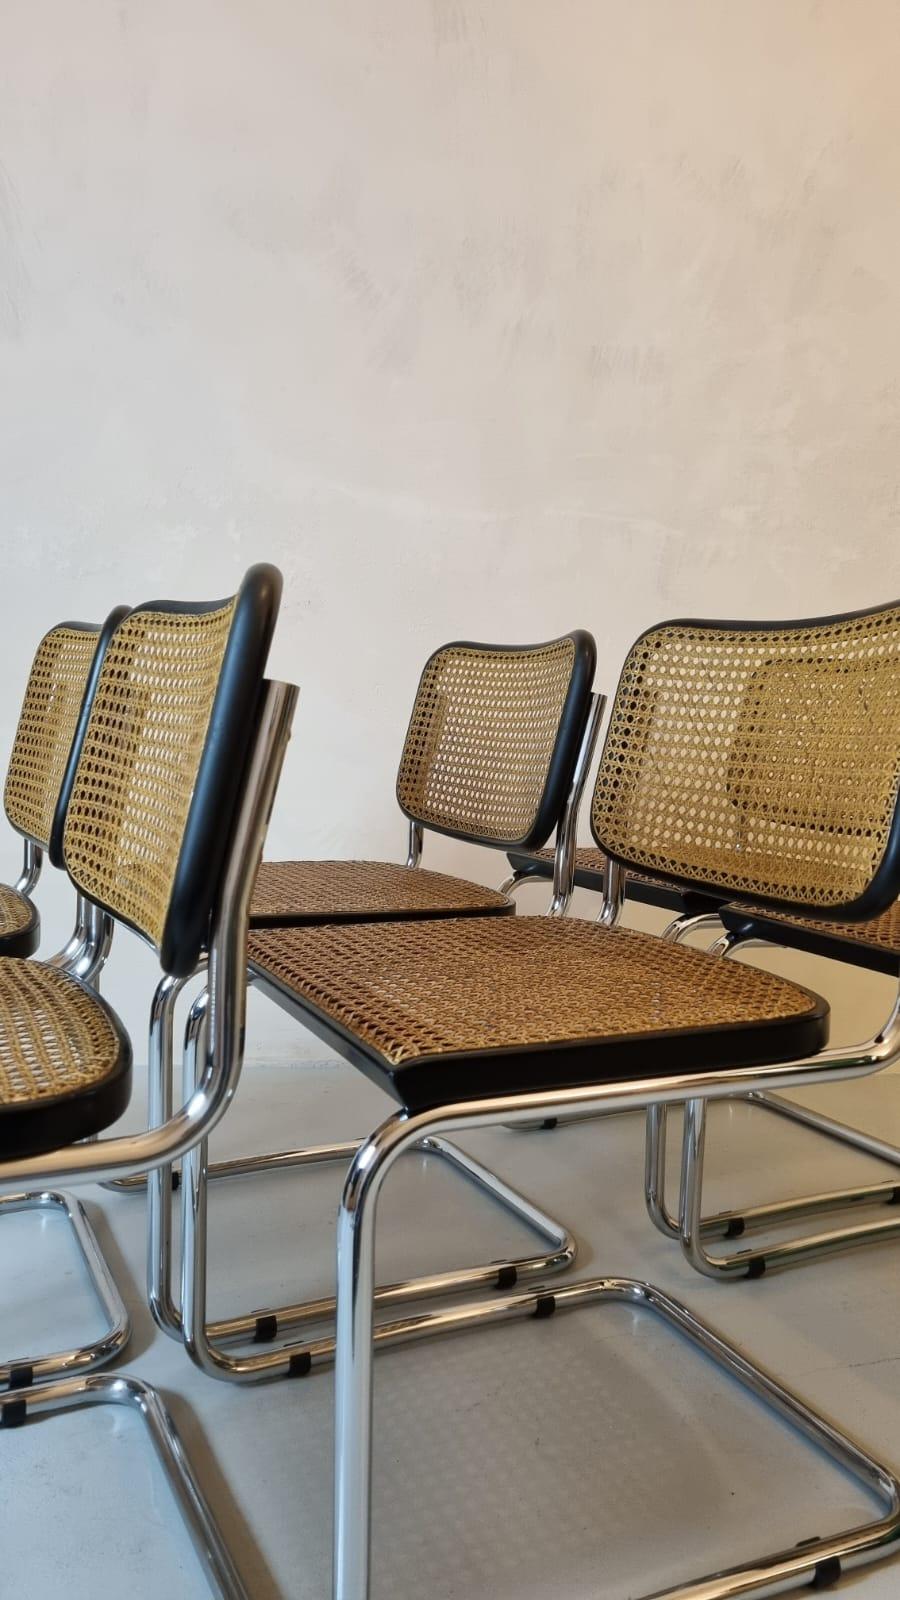 Set of 6 Cesca chairs designed by Marcel Breuer, produced by Gavina 1960.
The chairs show slight signs of wear, seats restored.
The meeting between Vienna straw and metal tubular, tradition and innovation, Thonet and Bauhaus, is what characterizes